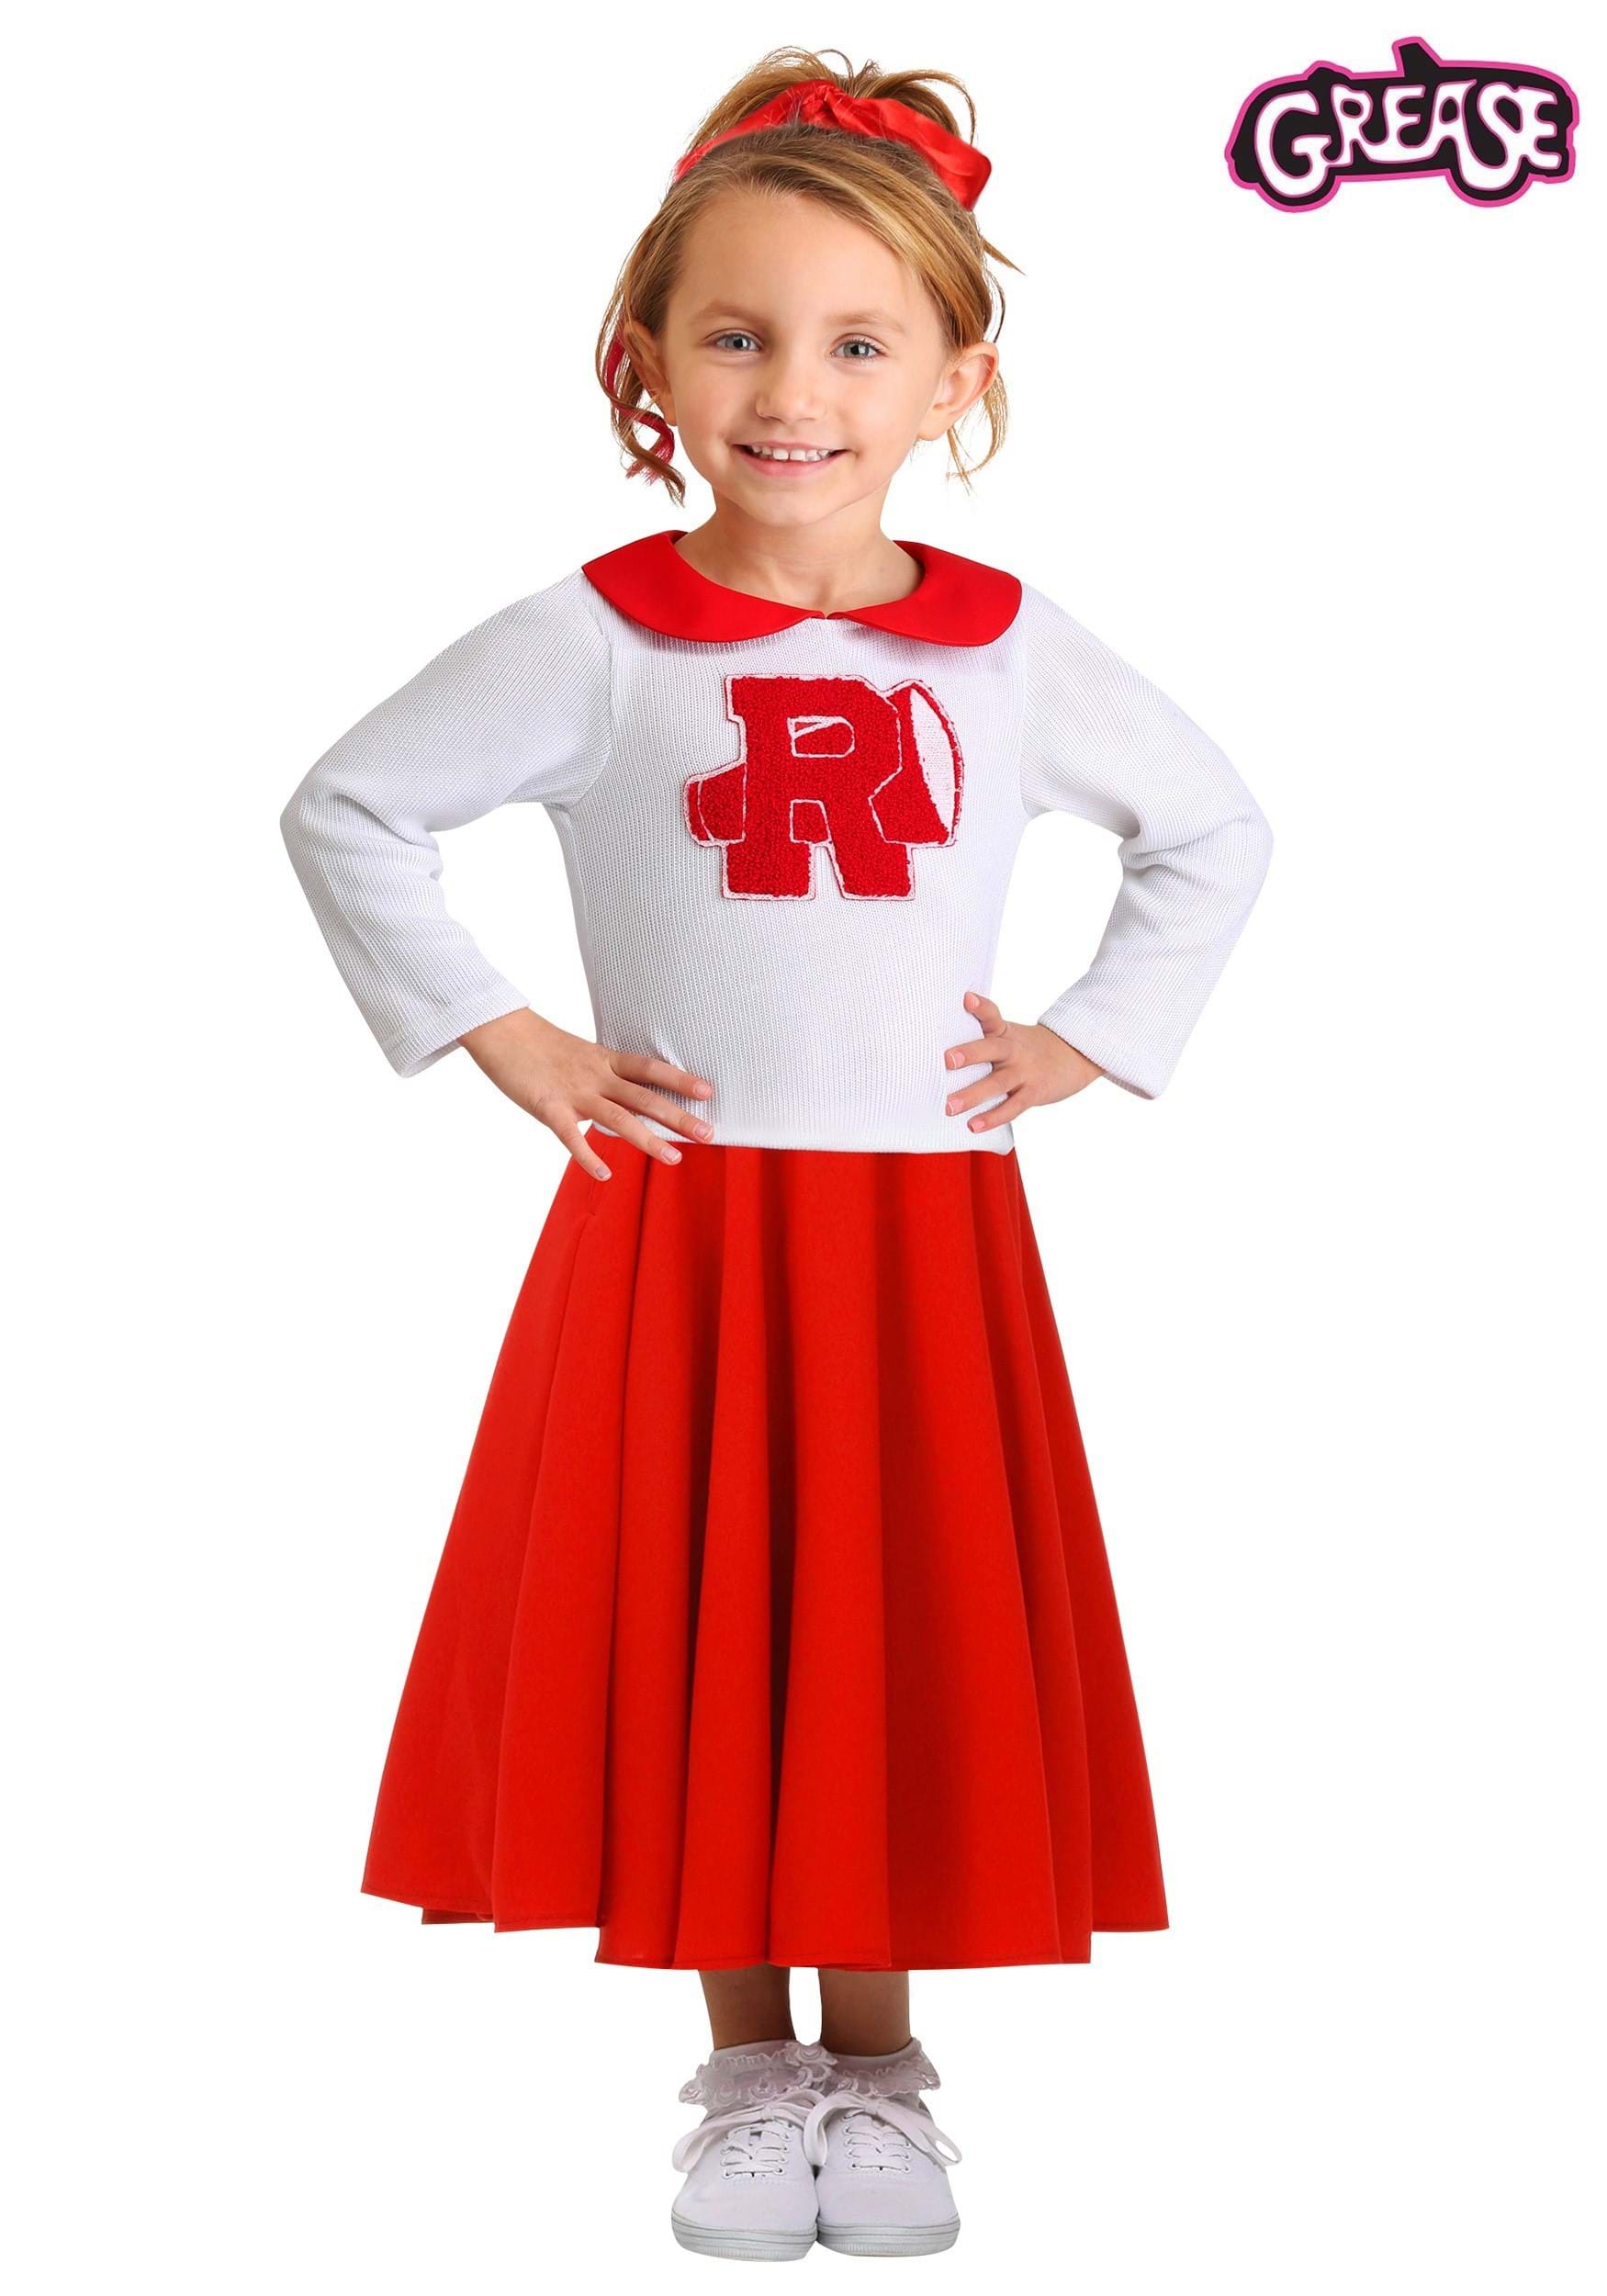 Photos - Fancy Dress Toddler FUN Costumes  Grease Rydell High Cheerleader Costume Red/White 